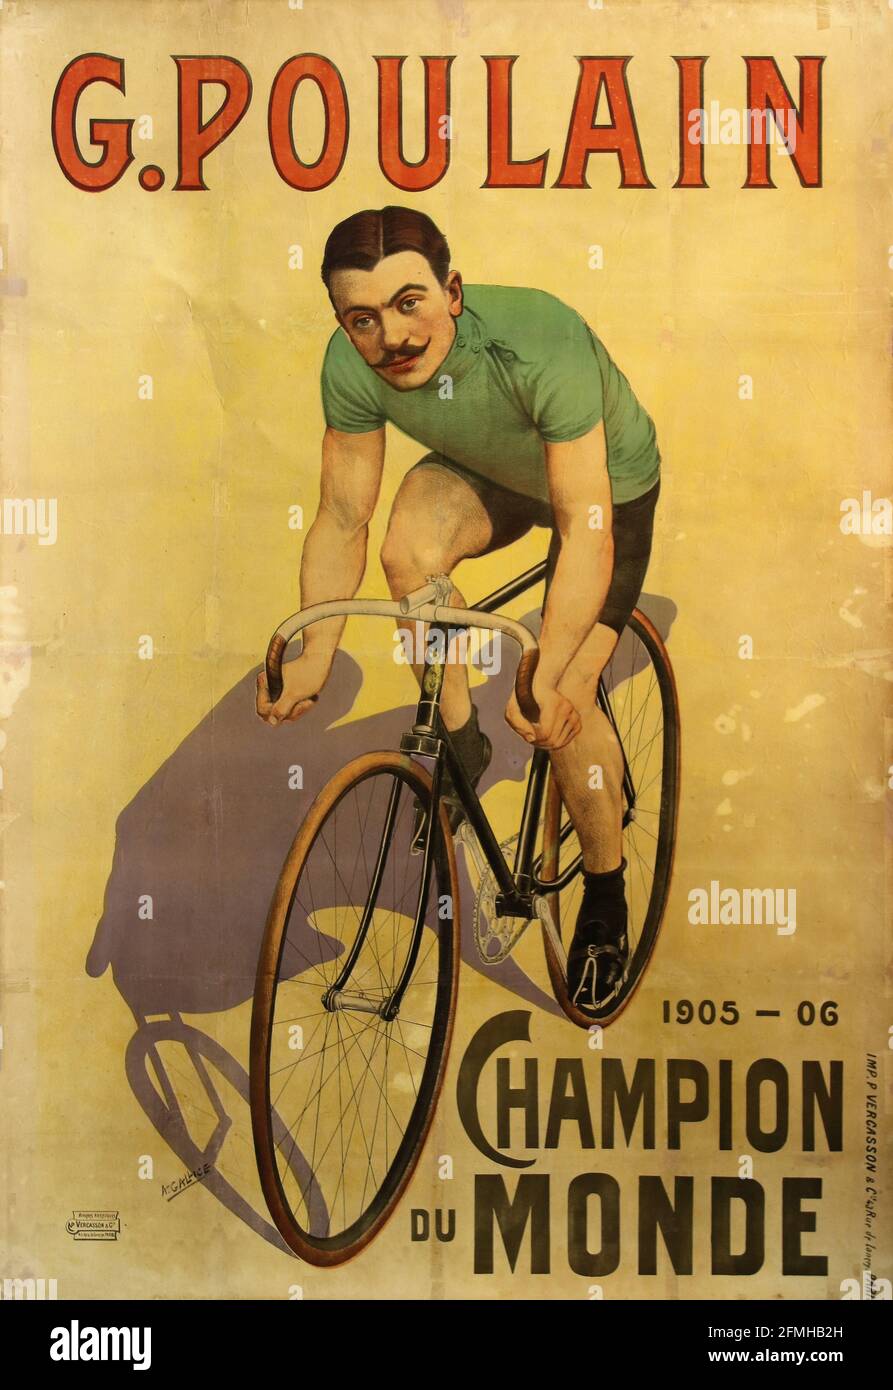 G. Poulain. Champion du Monde. 1905. Bicycle advertisement poster. Old and vintage. Gabriel Poulain (1884 – 1953) was a French champion cyclist. Stock Photo